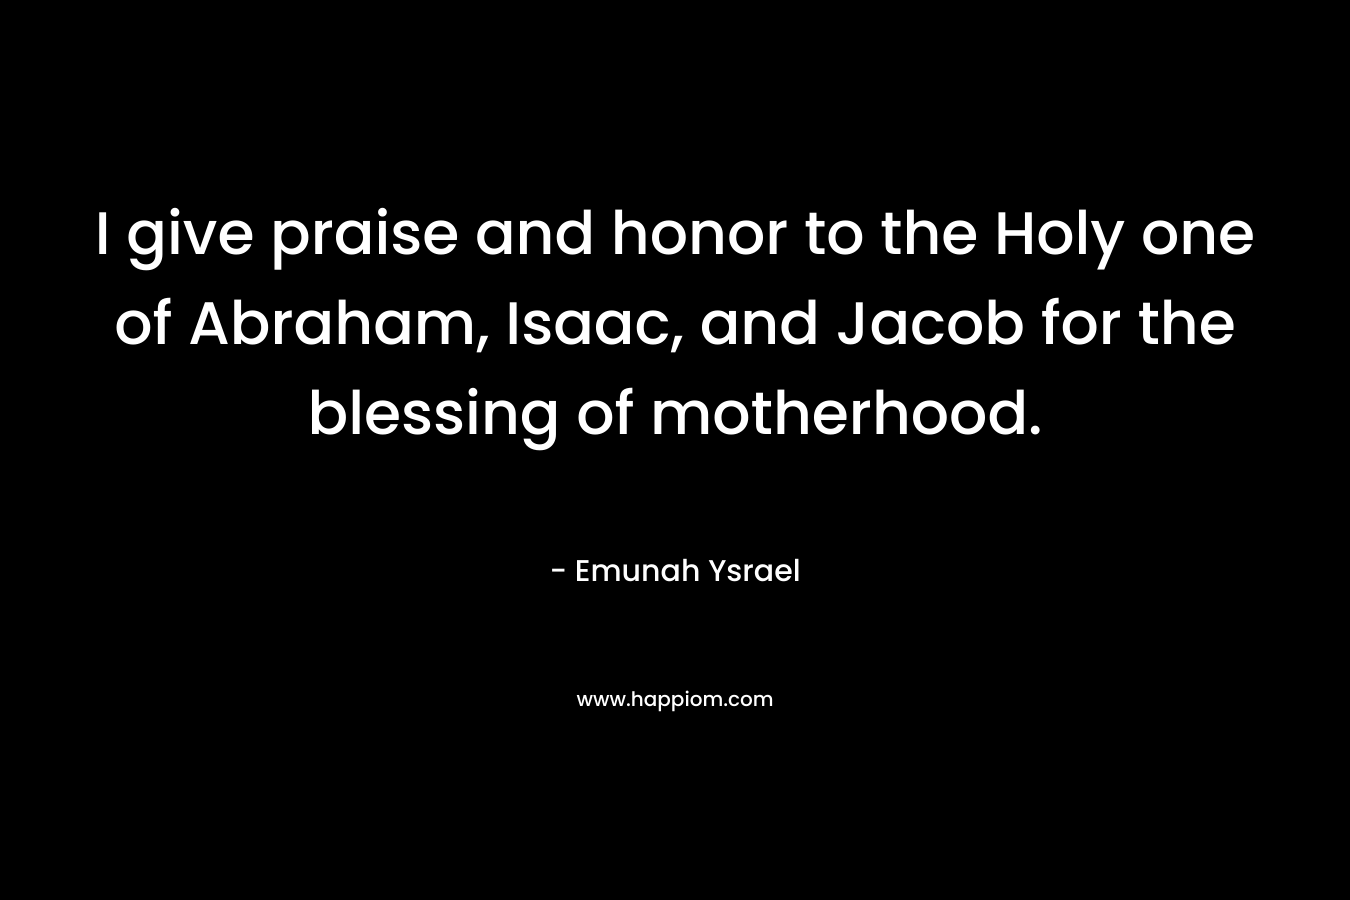 I give praise and honor to the Holy one of Abraham, Isaac, and Jacob for the blessing of motherhood. – Emunah Ysrael